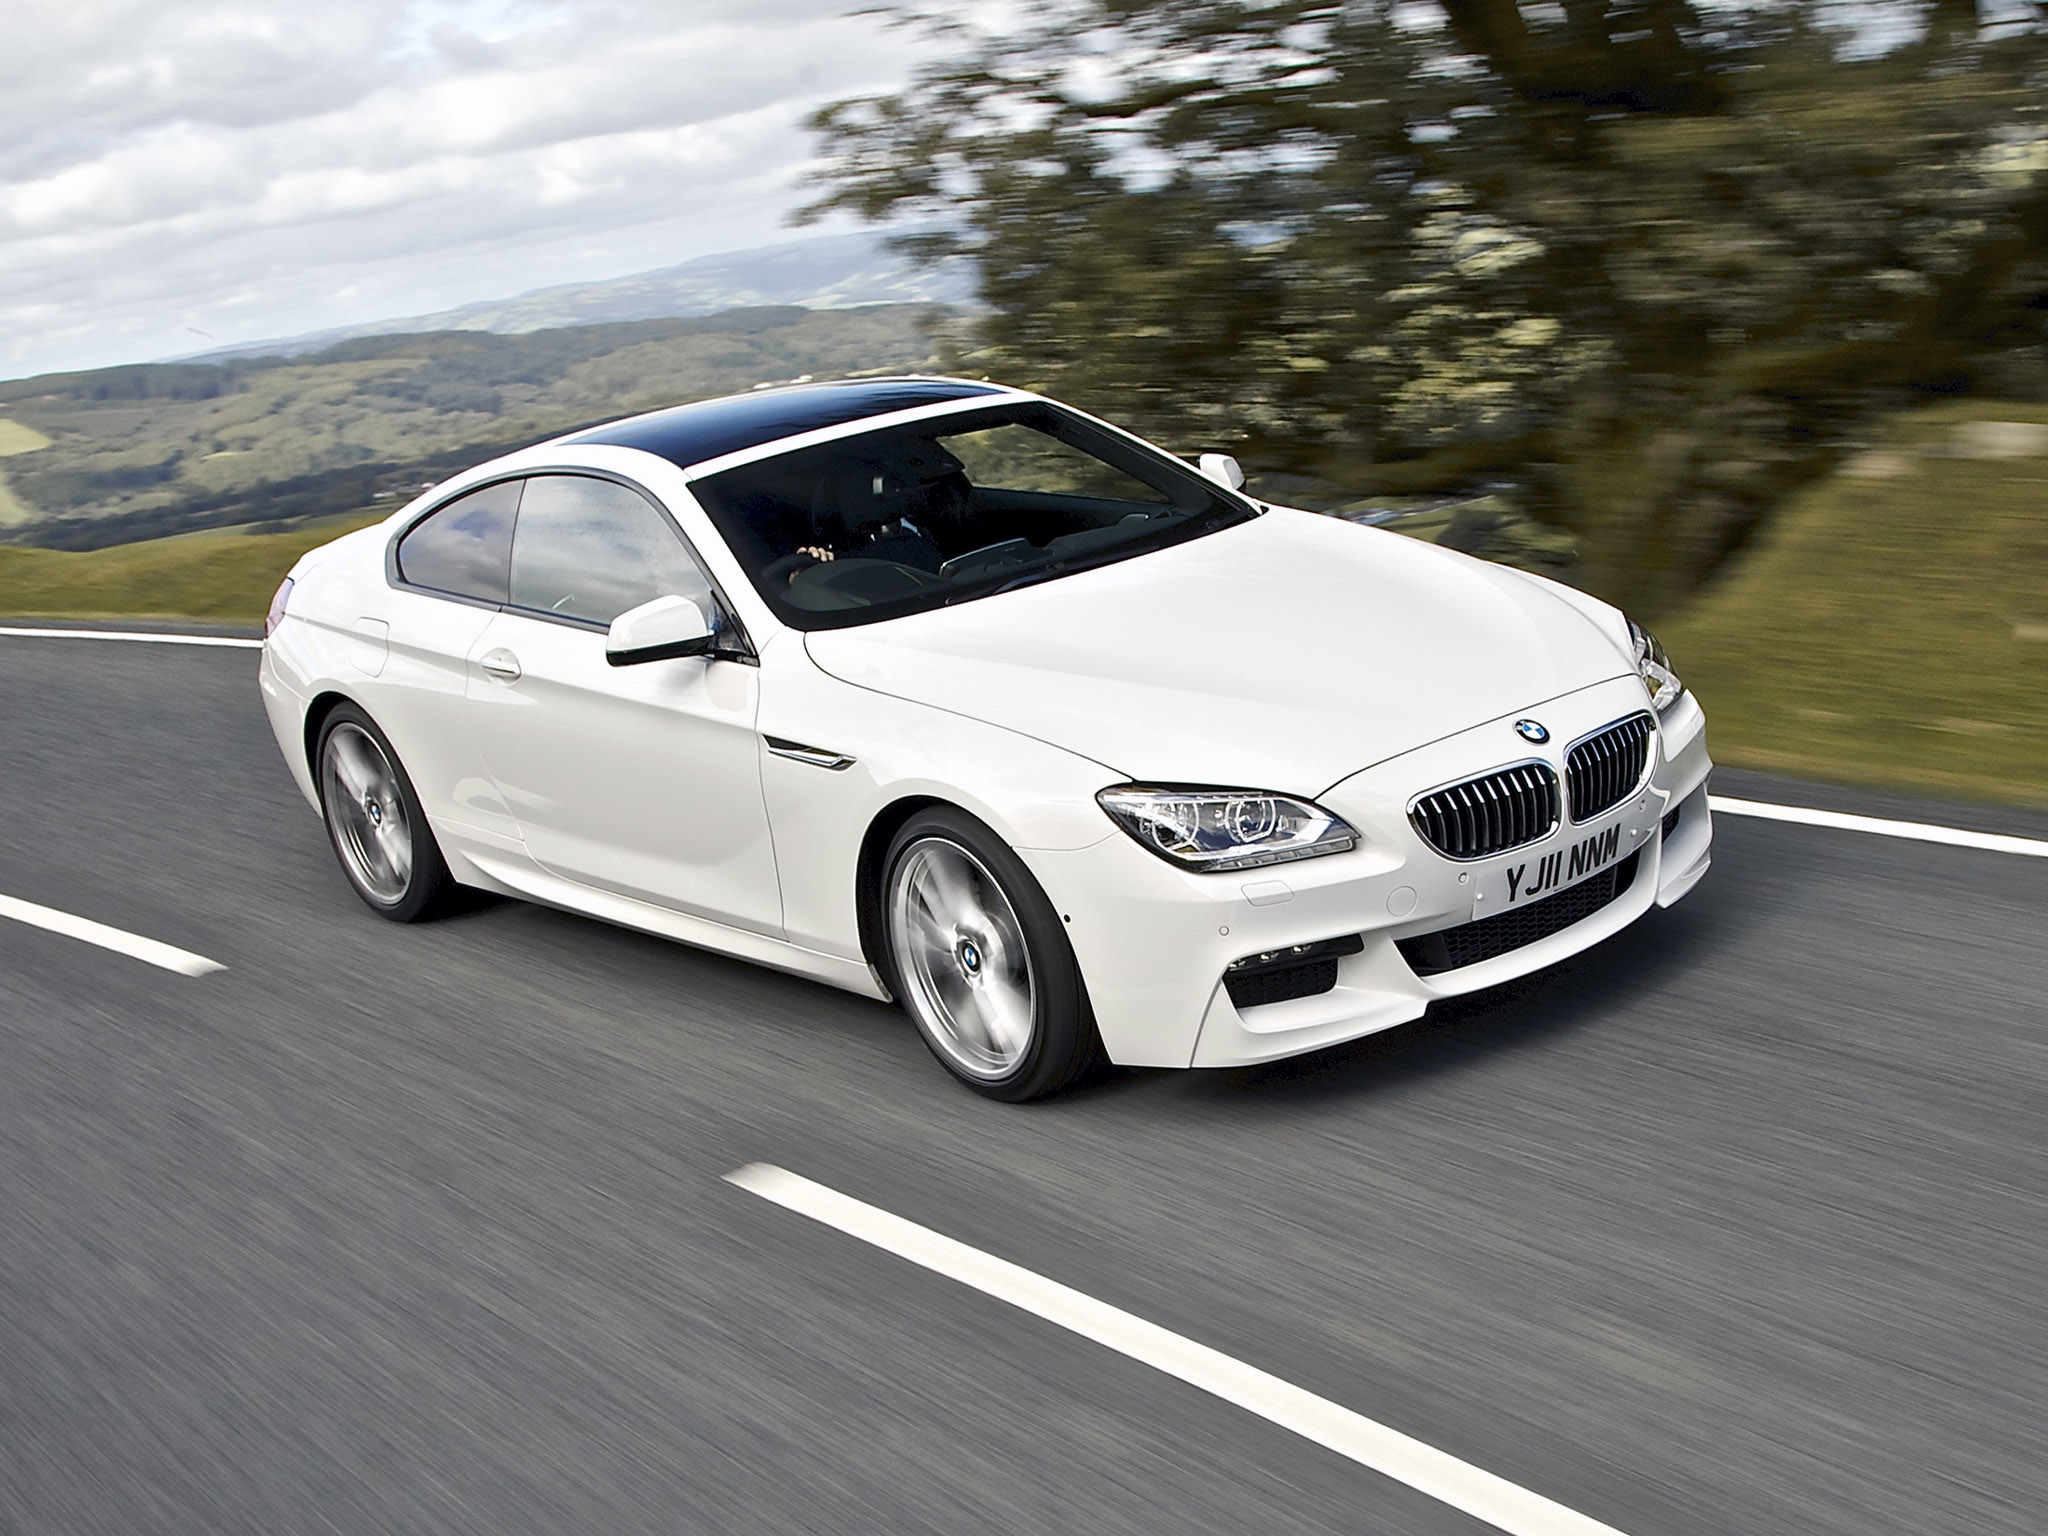 Bmw 630i sport coupe review #3